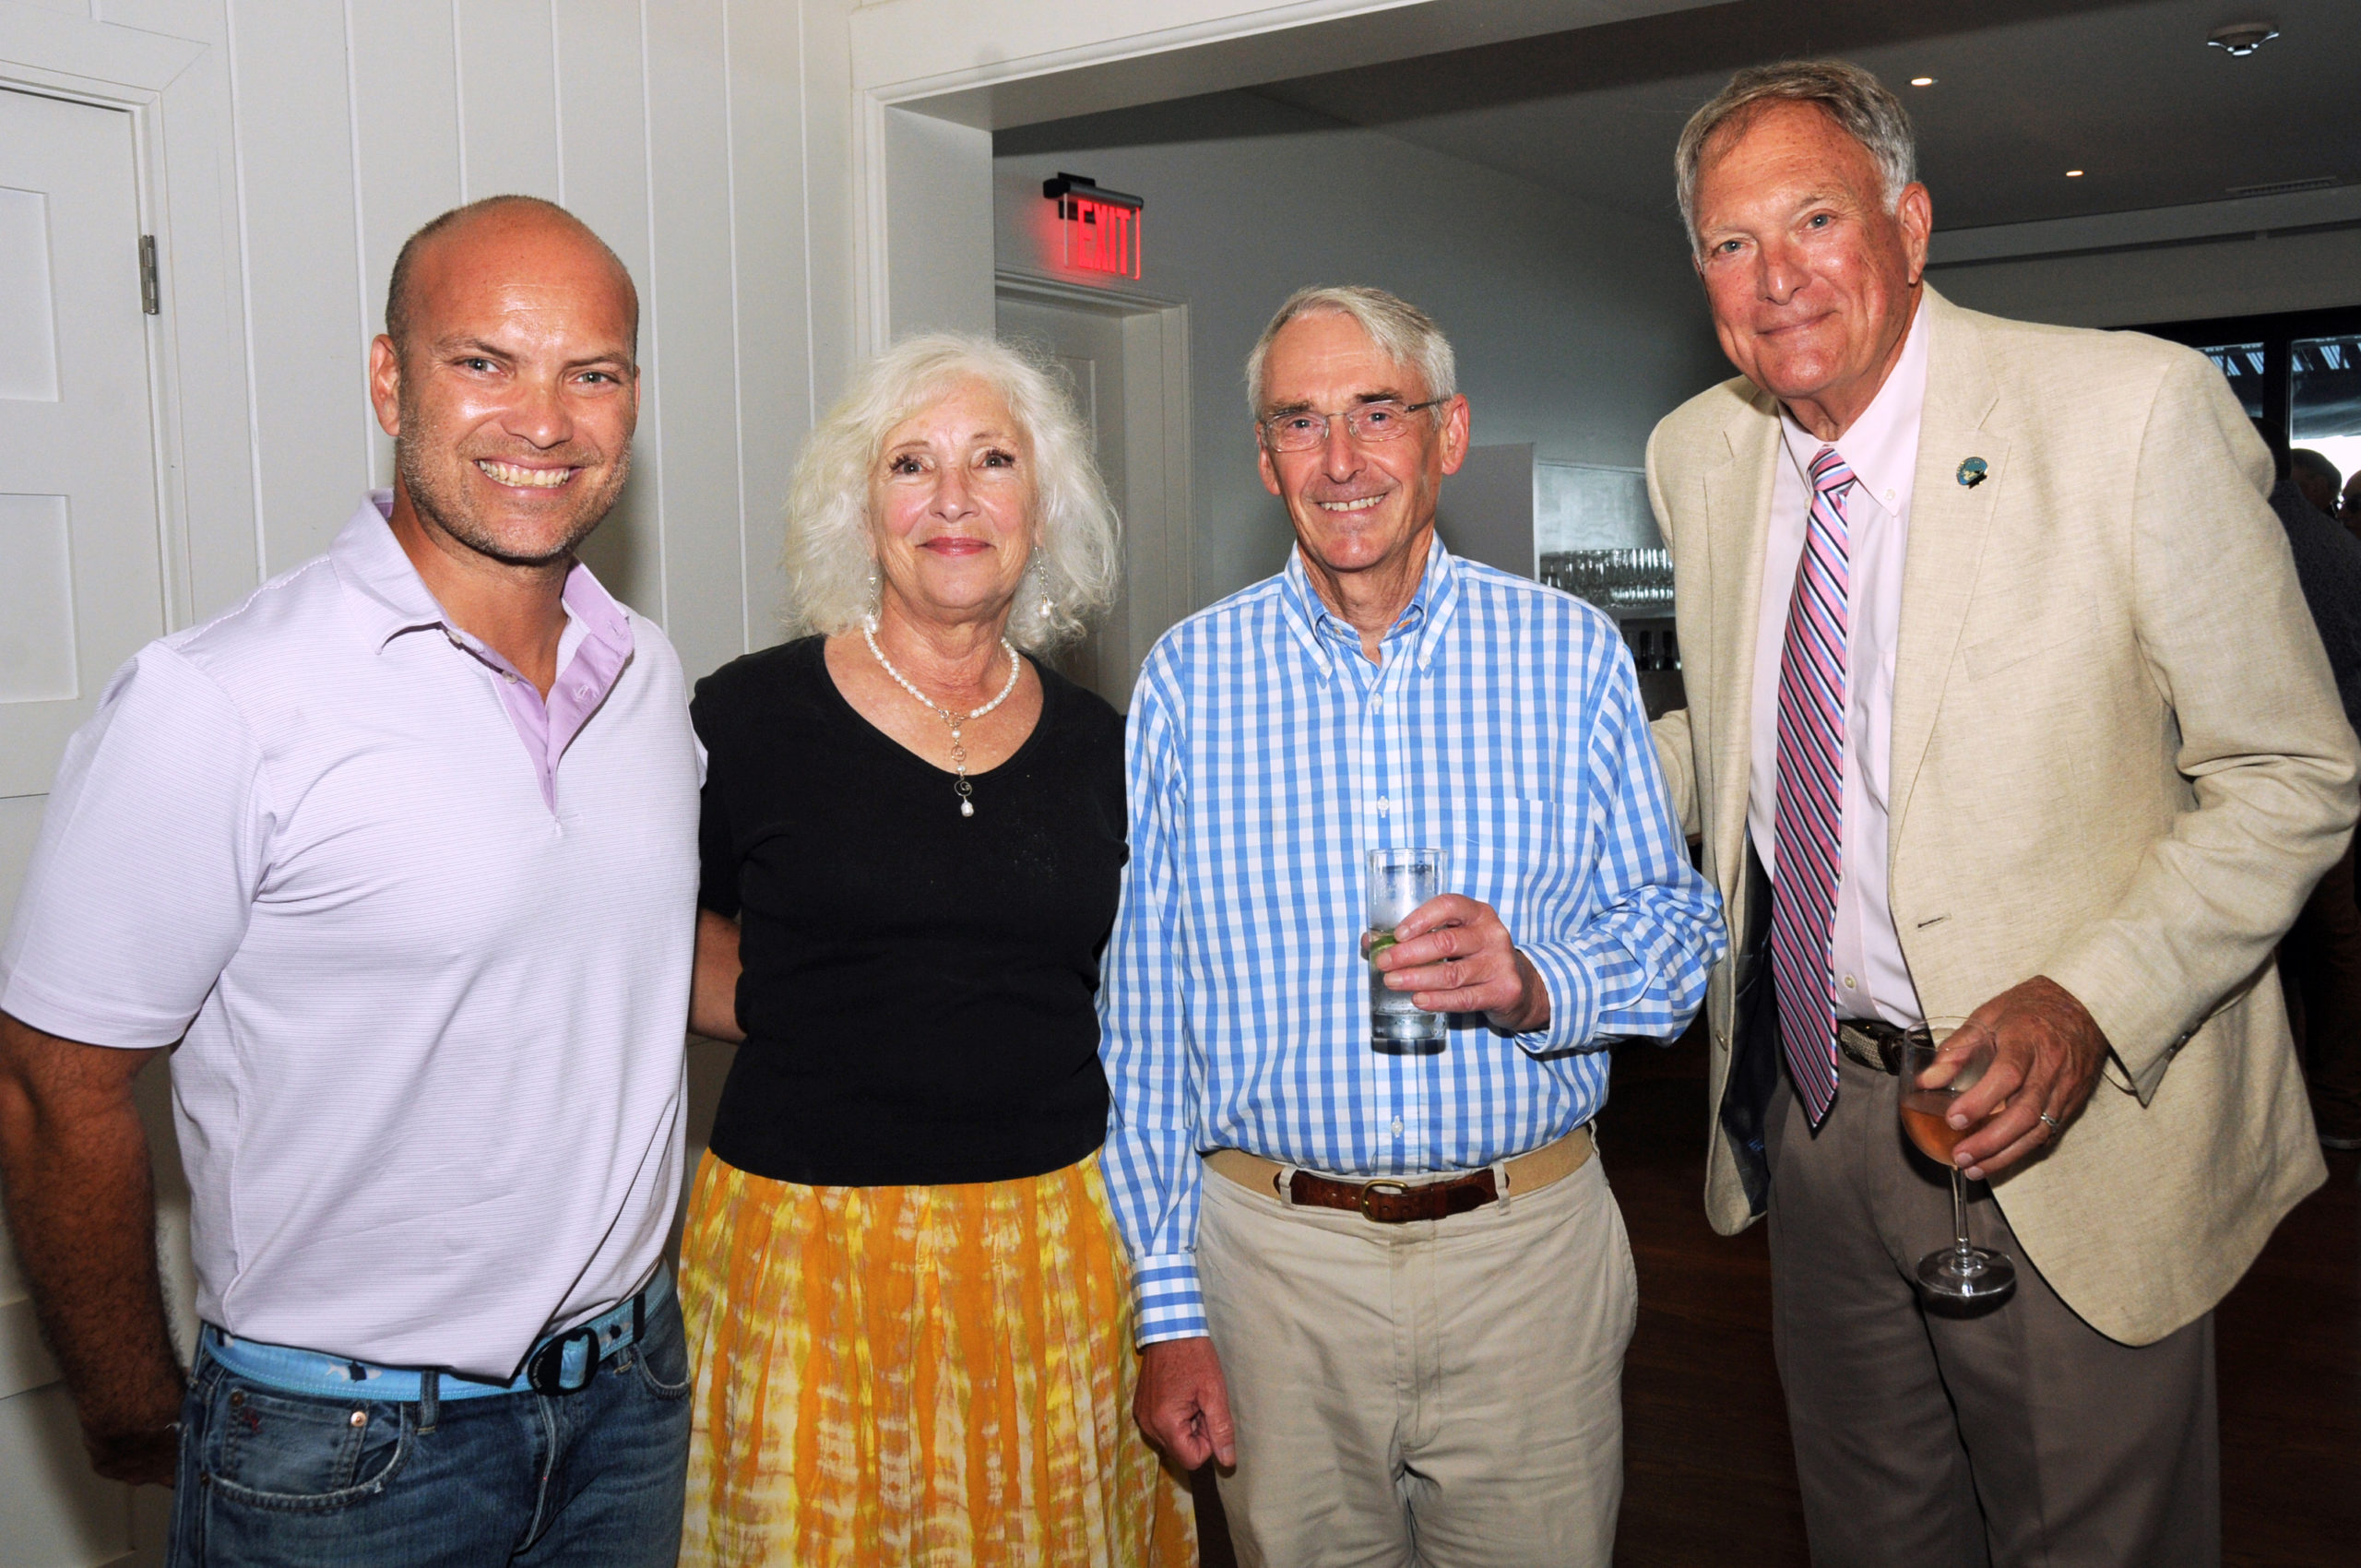 East Hampton Town Councilman David Lys; Executive Director of the Robert David Lion Gardiner Foundation Kathryn Curran; Robert Hefner and Noel Gish at the Montauk Historical Society's cocktail party on July 14 to launch a public capital campaign for the Montauk Point Lighthouse restoration.  Work on restoring the tower began in 2019, and is scheduled to be completed by next year.     RICHARD LEWIN